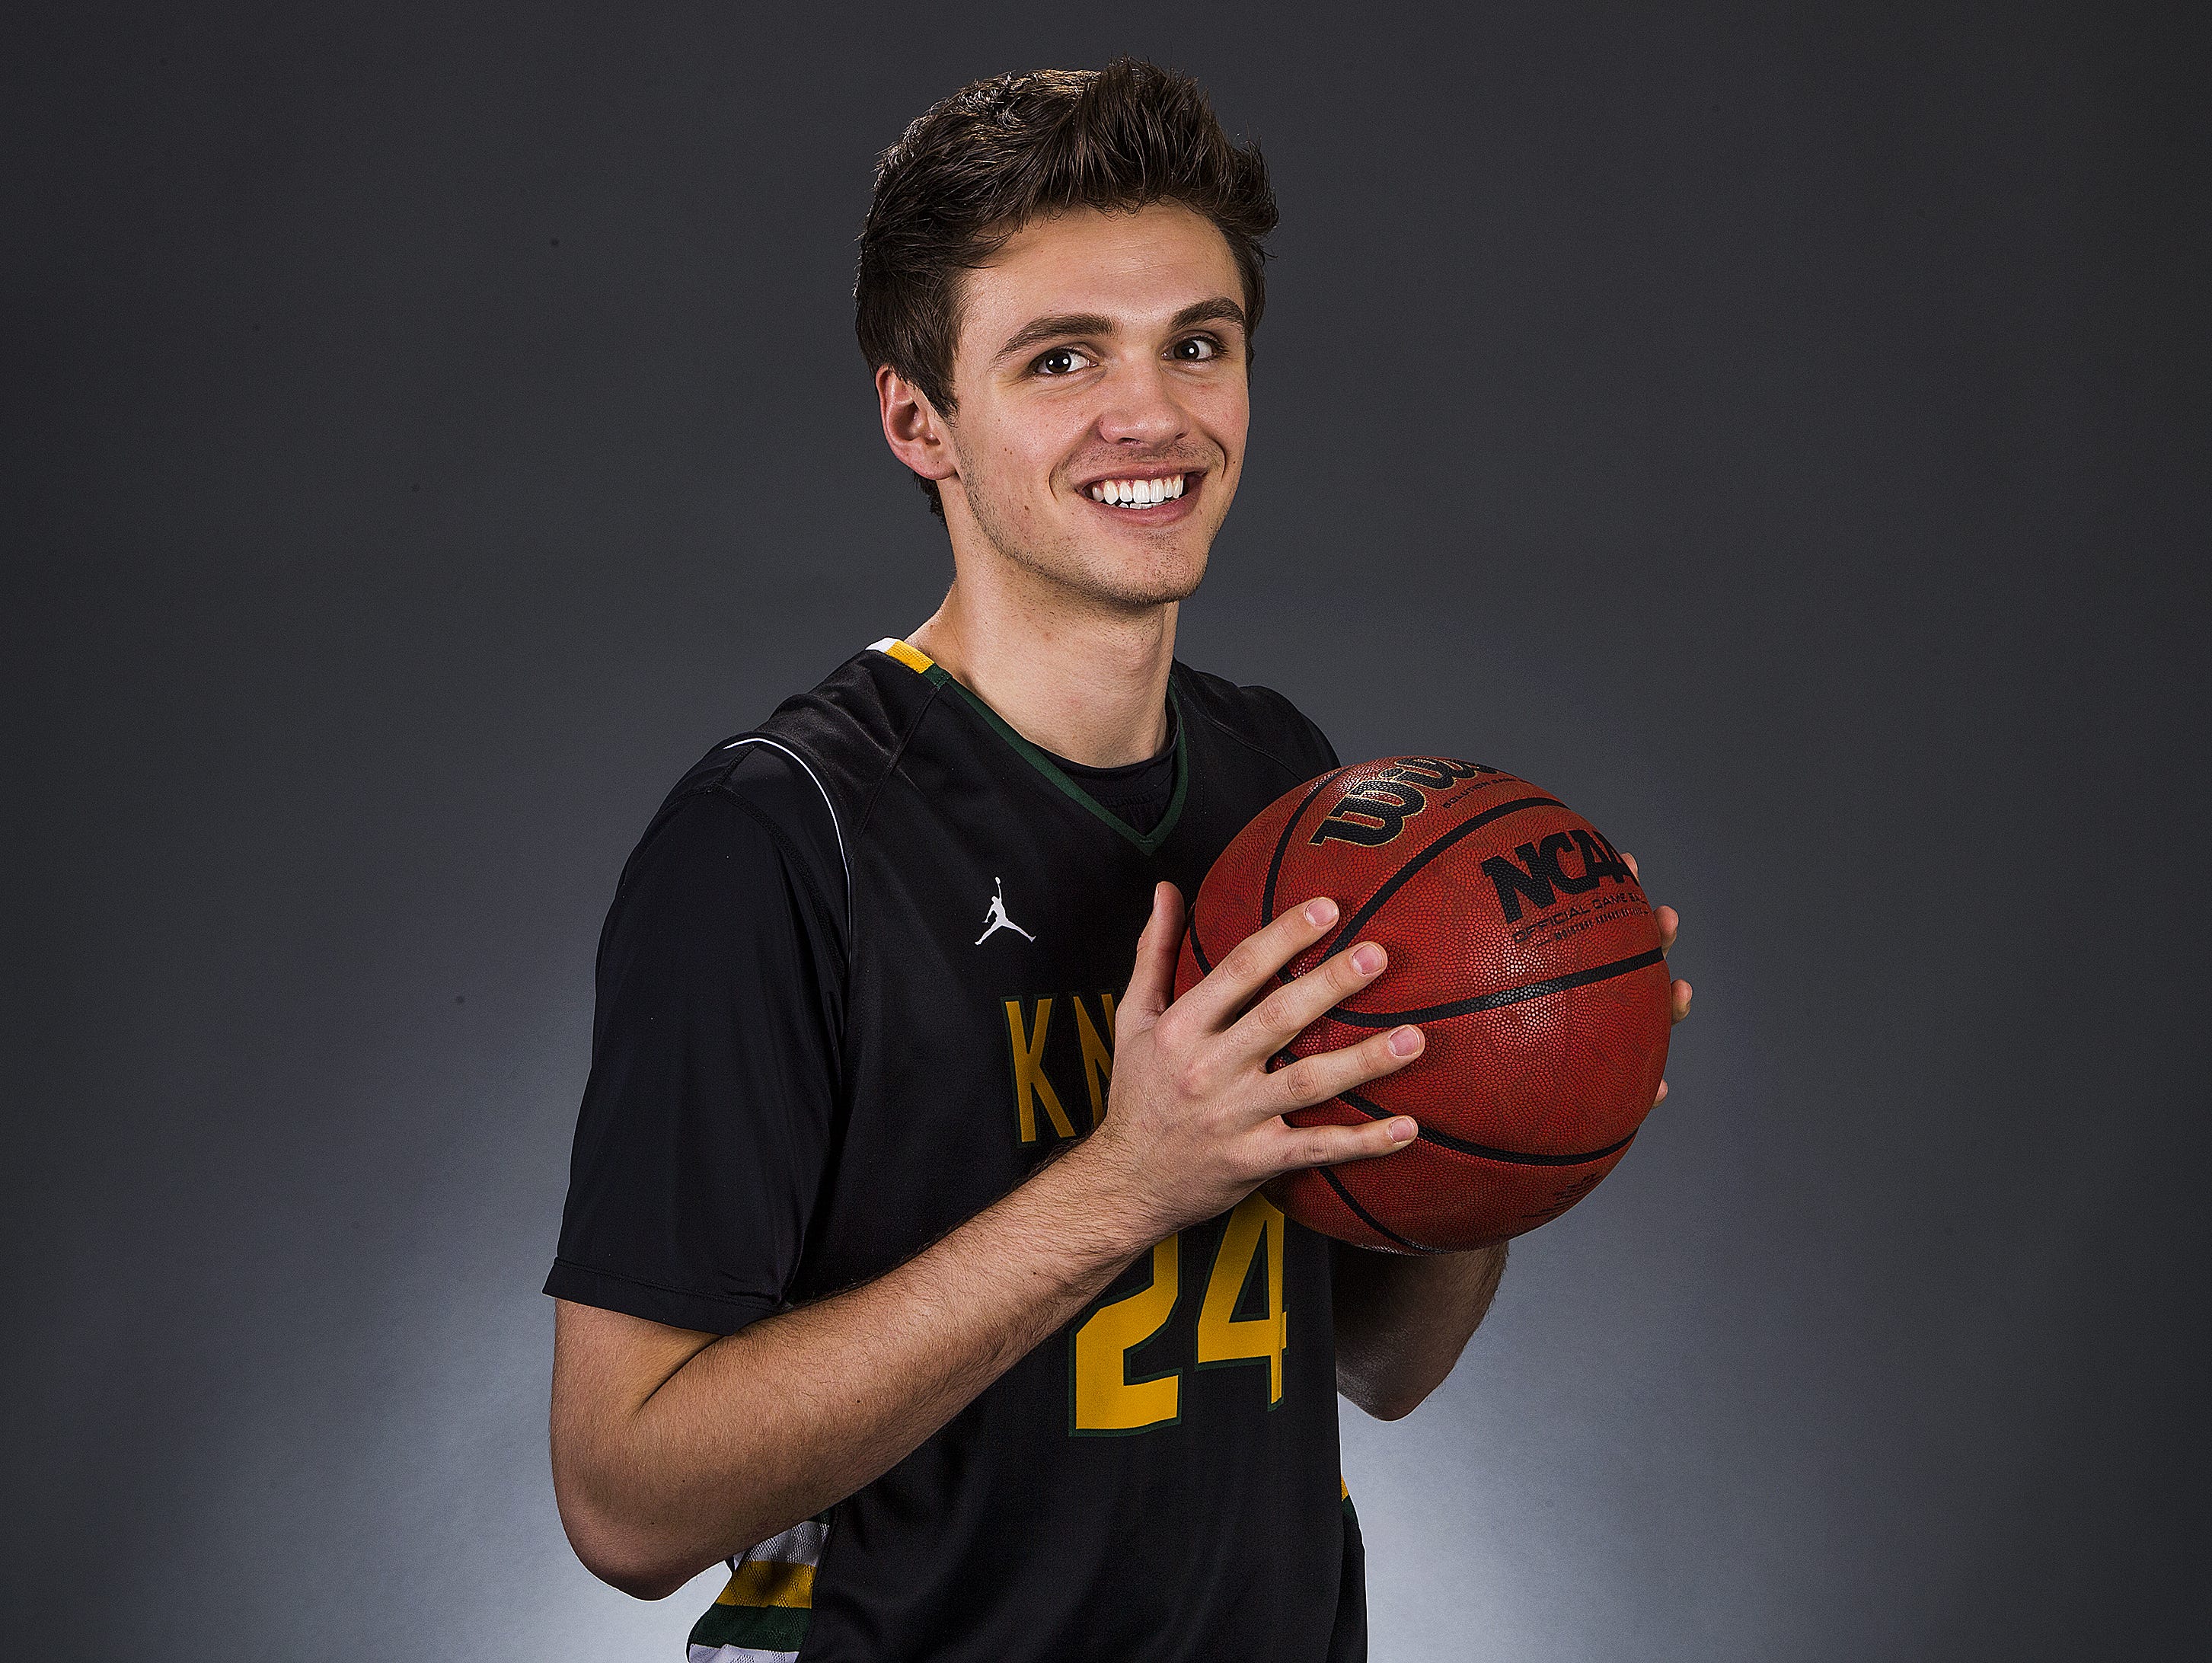 Gilbert Christian senior forward Nate Graville is a finalist for the azcentral.com Sports Awards Small Schools Boys Basketball Athlete of the Year award.